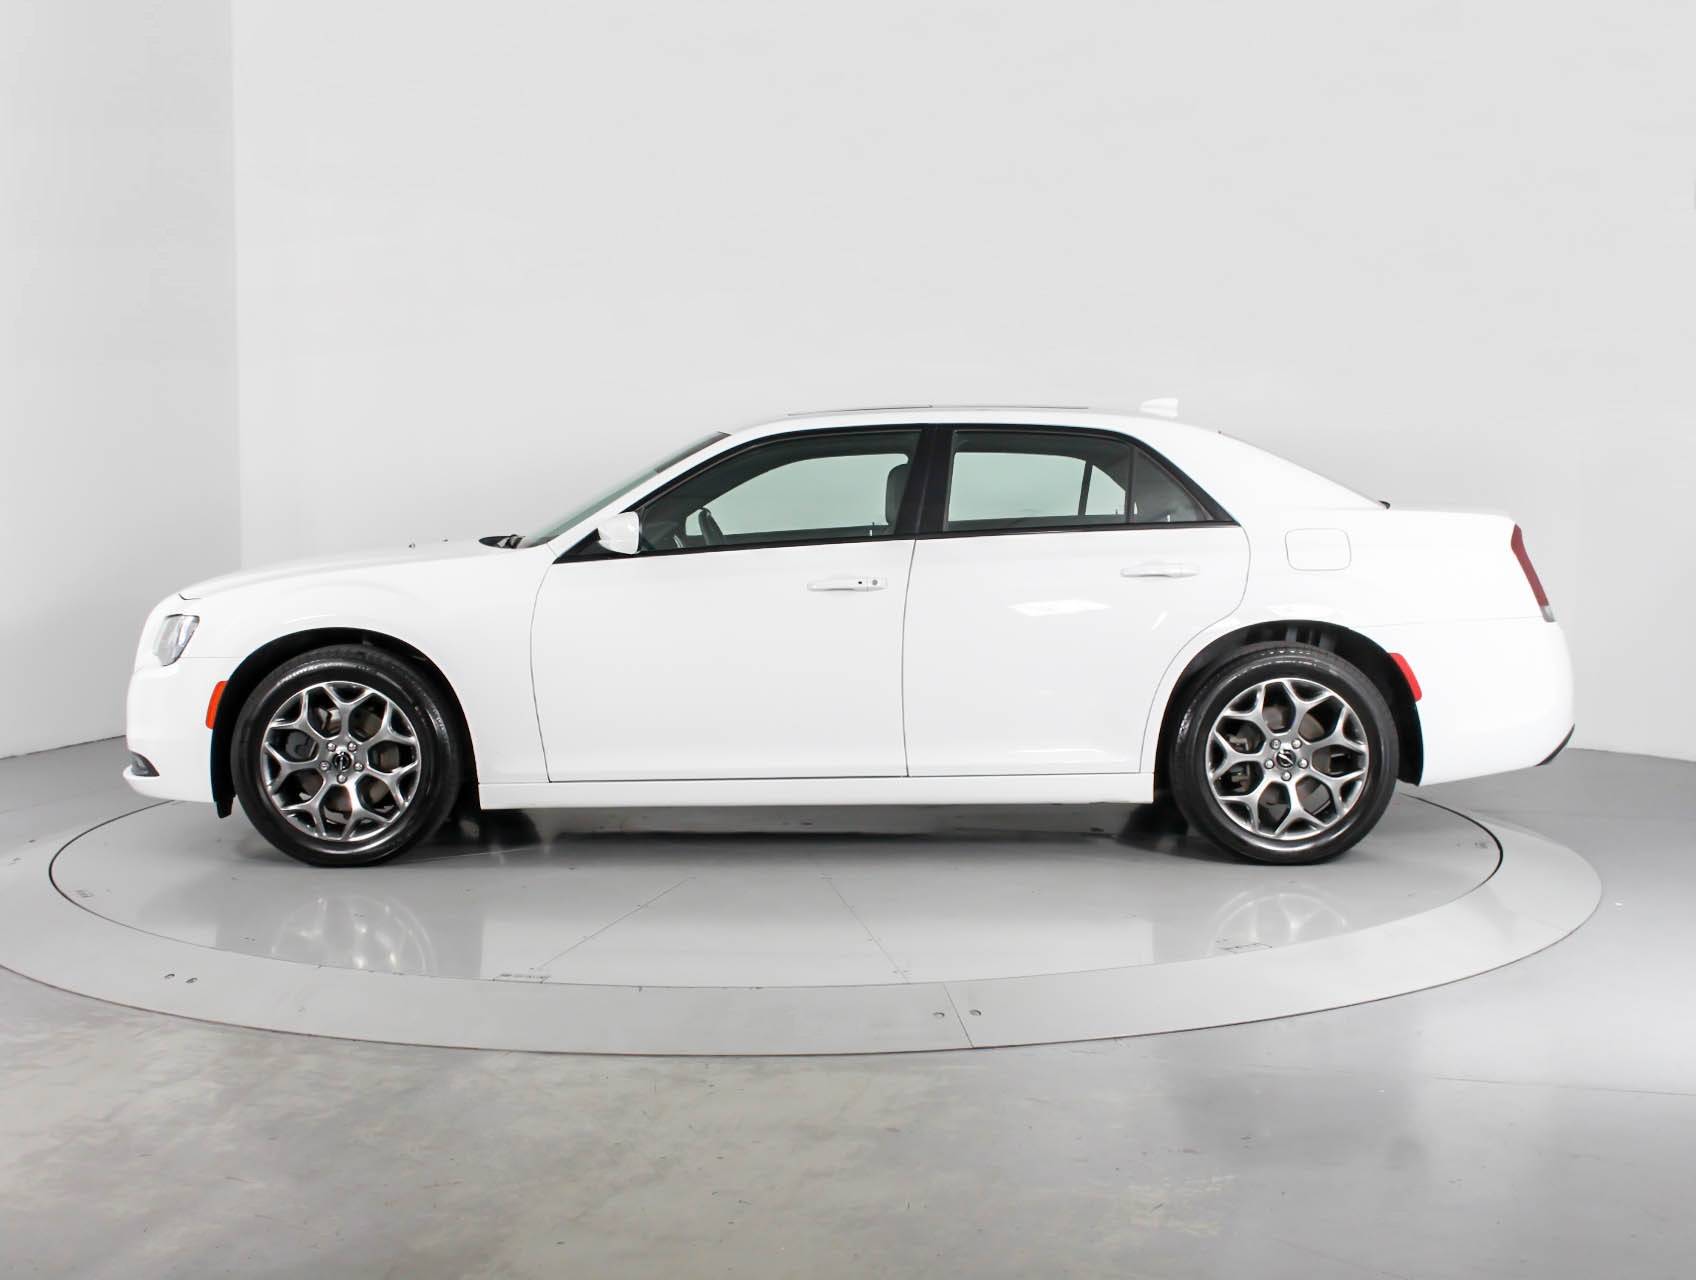 Florida Fine Cars - Used CHRYSLER 300S 2016 WEST PALM 